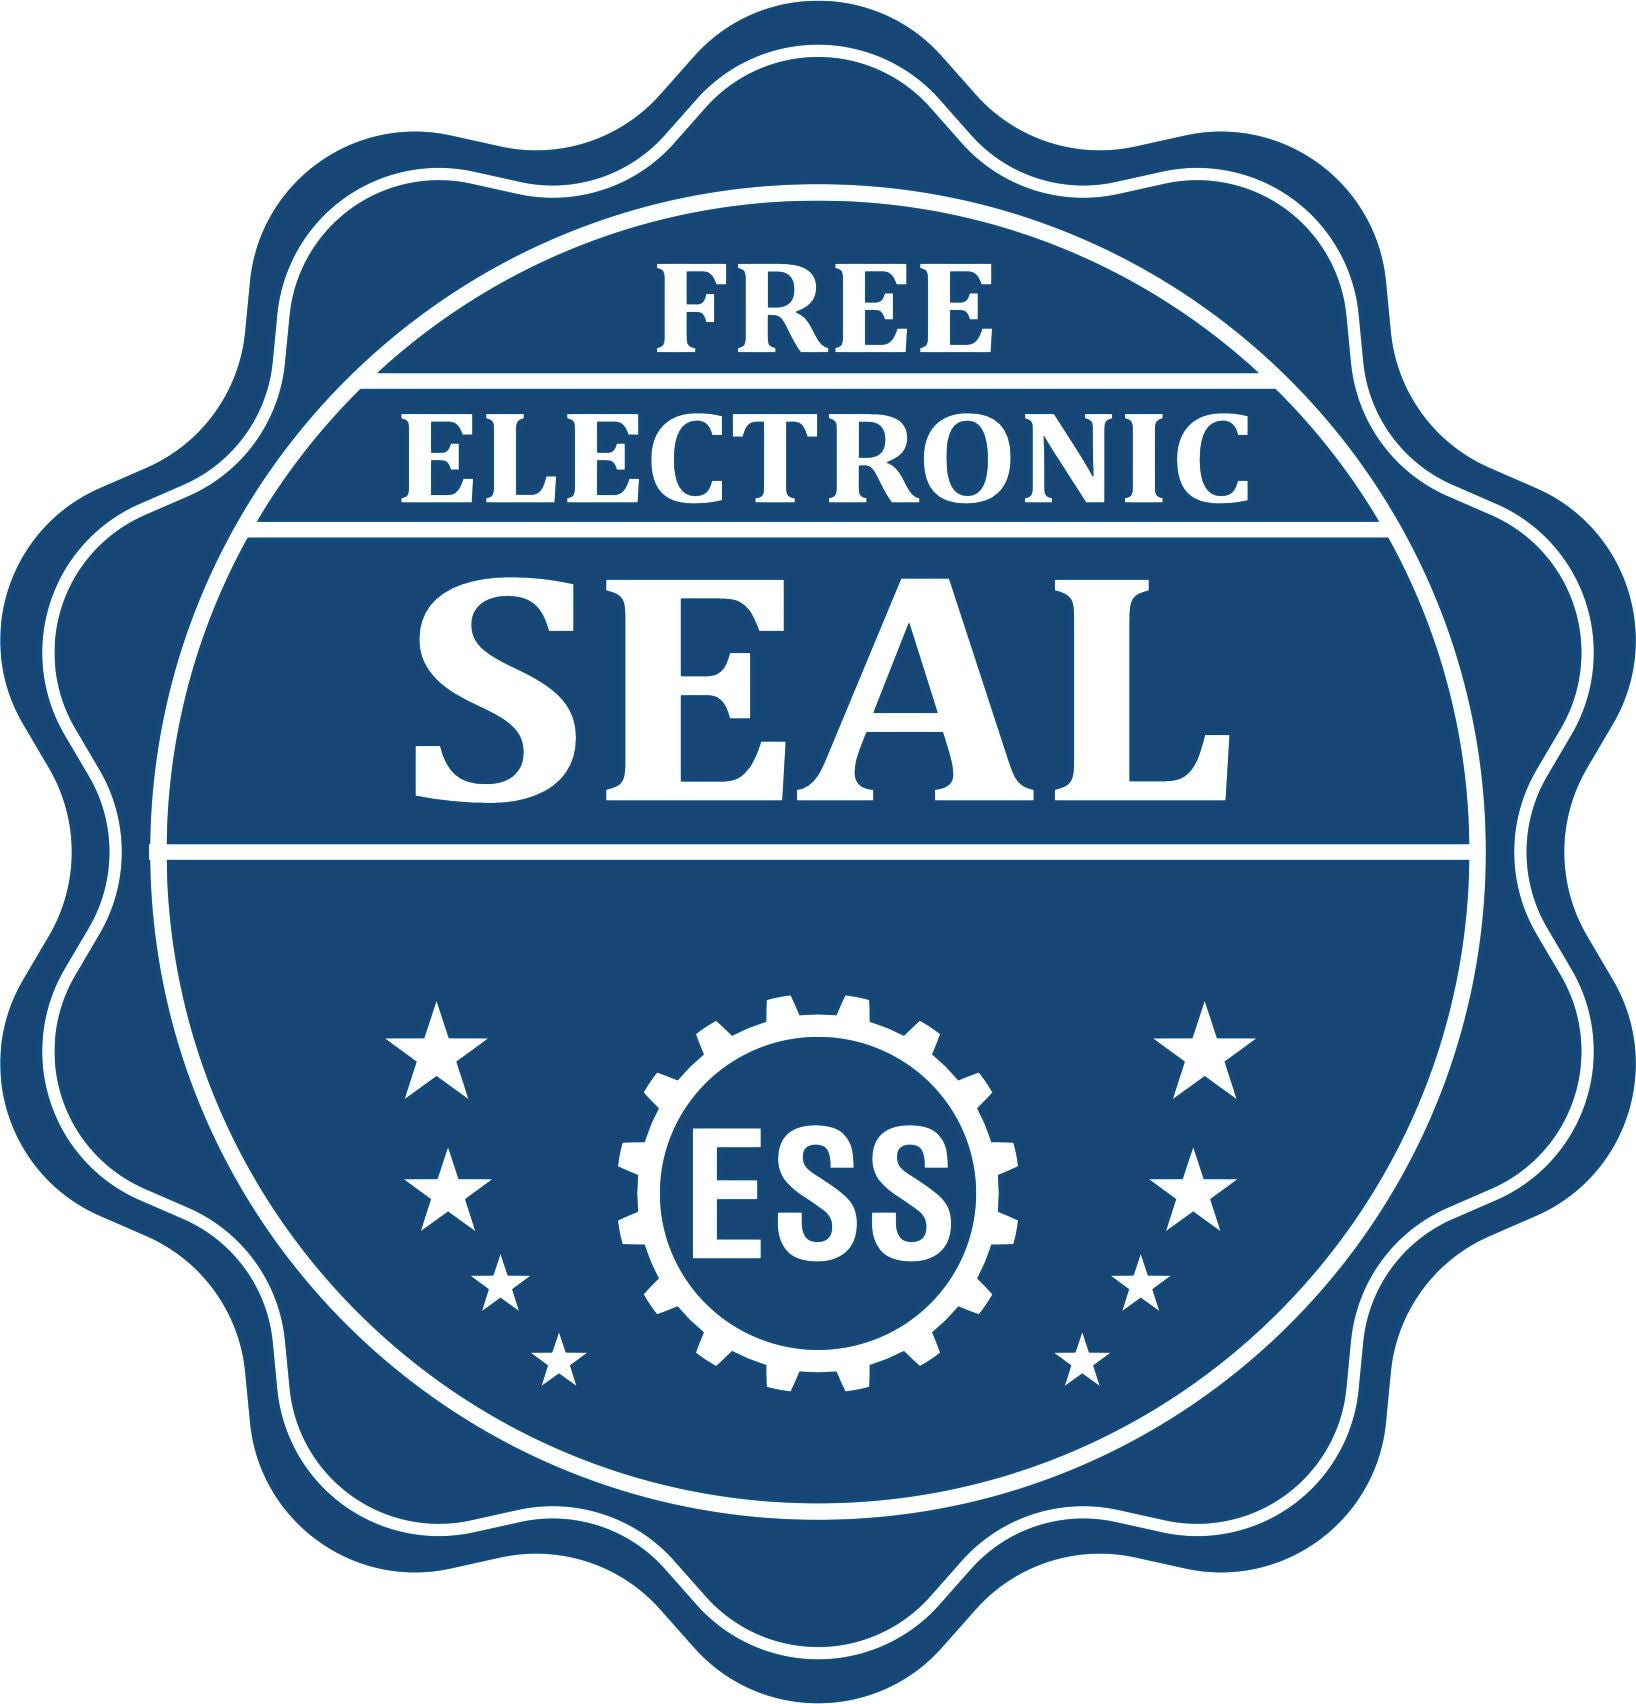 A badge showing a free electronic seal for the Heavy Duty Cast Iron Oklahoma Land Surveyor Seal Embosser with stars and the ESS gear on the emblem.